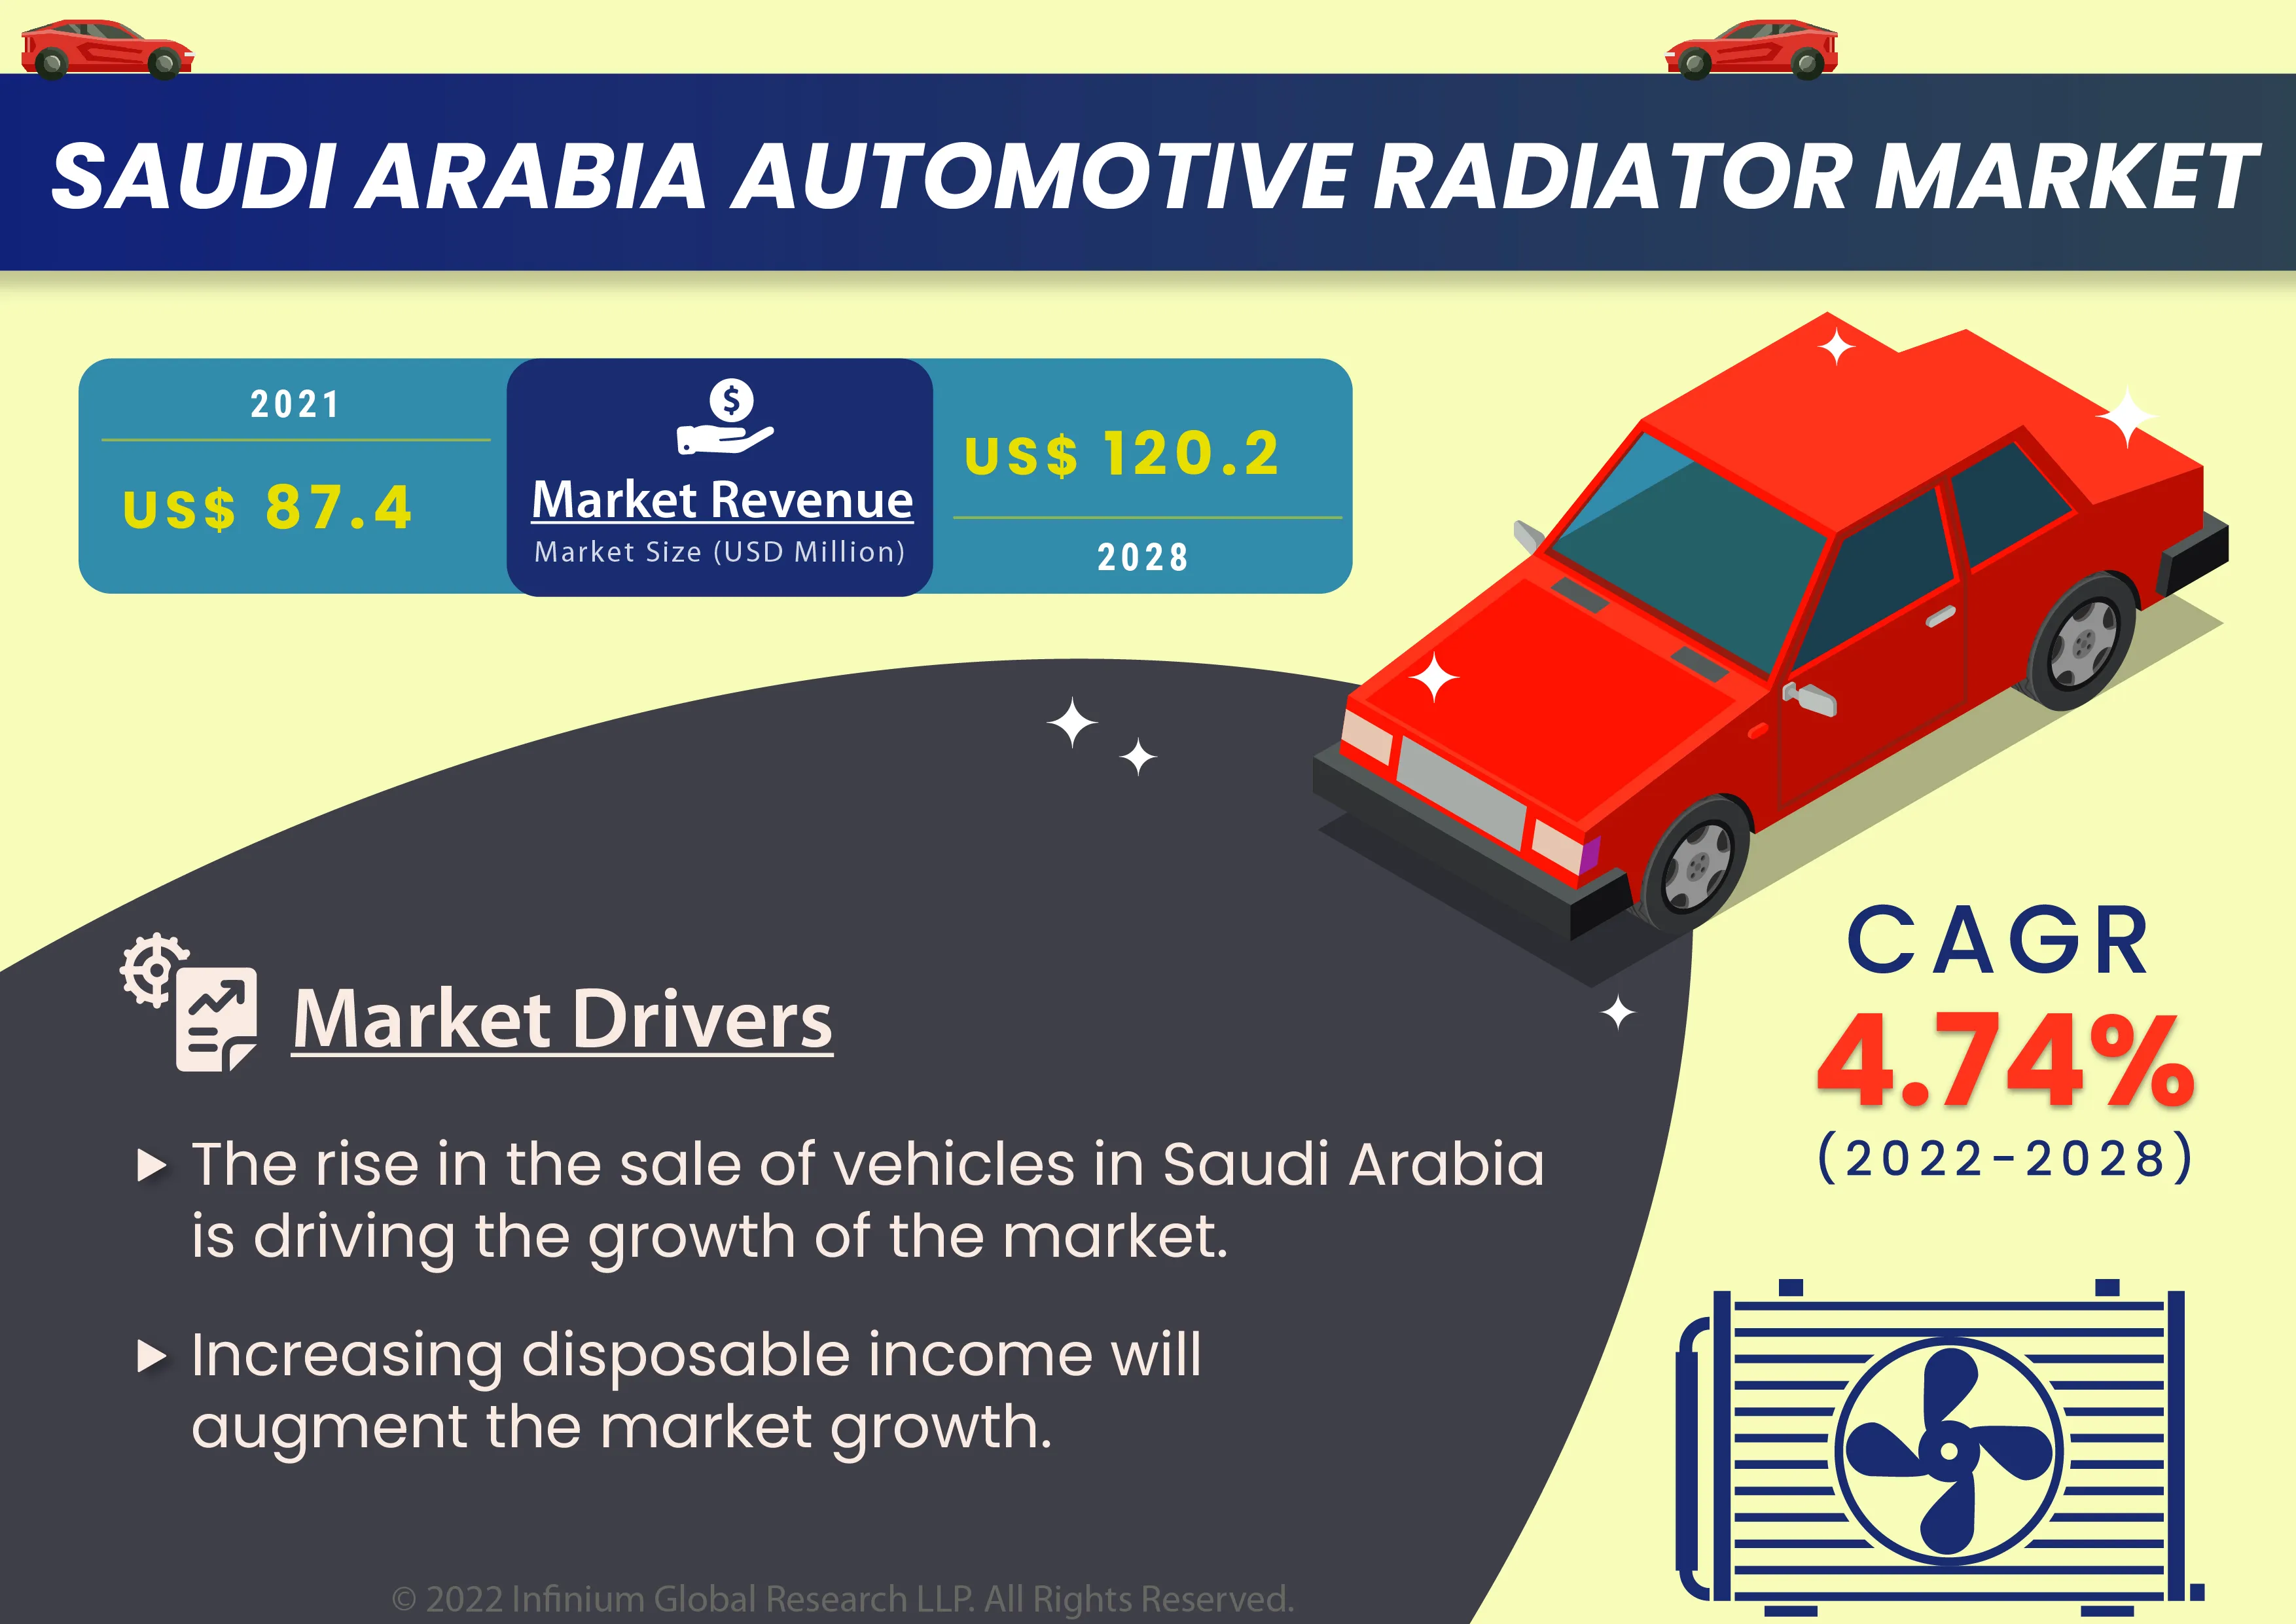 Saudi Arabia Automotive Radiator Market Size Was Valued at USD 87.4 Million in 2021 and is Expected to Reach USD 120.2 Million in 2028, With a CAGR of 4.74% During the Forecast Period 2022-2028.